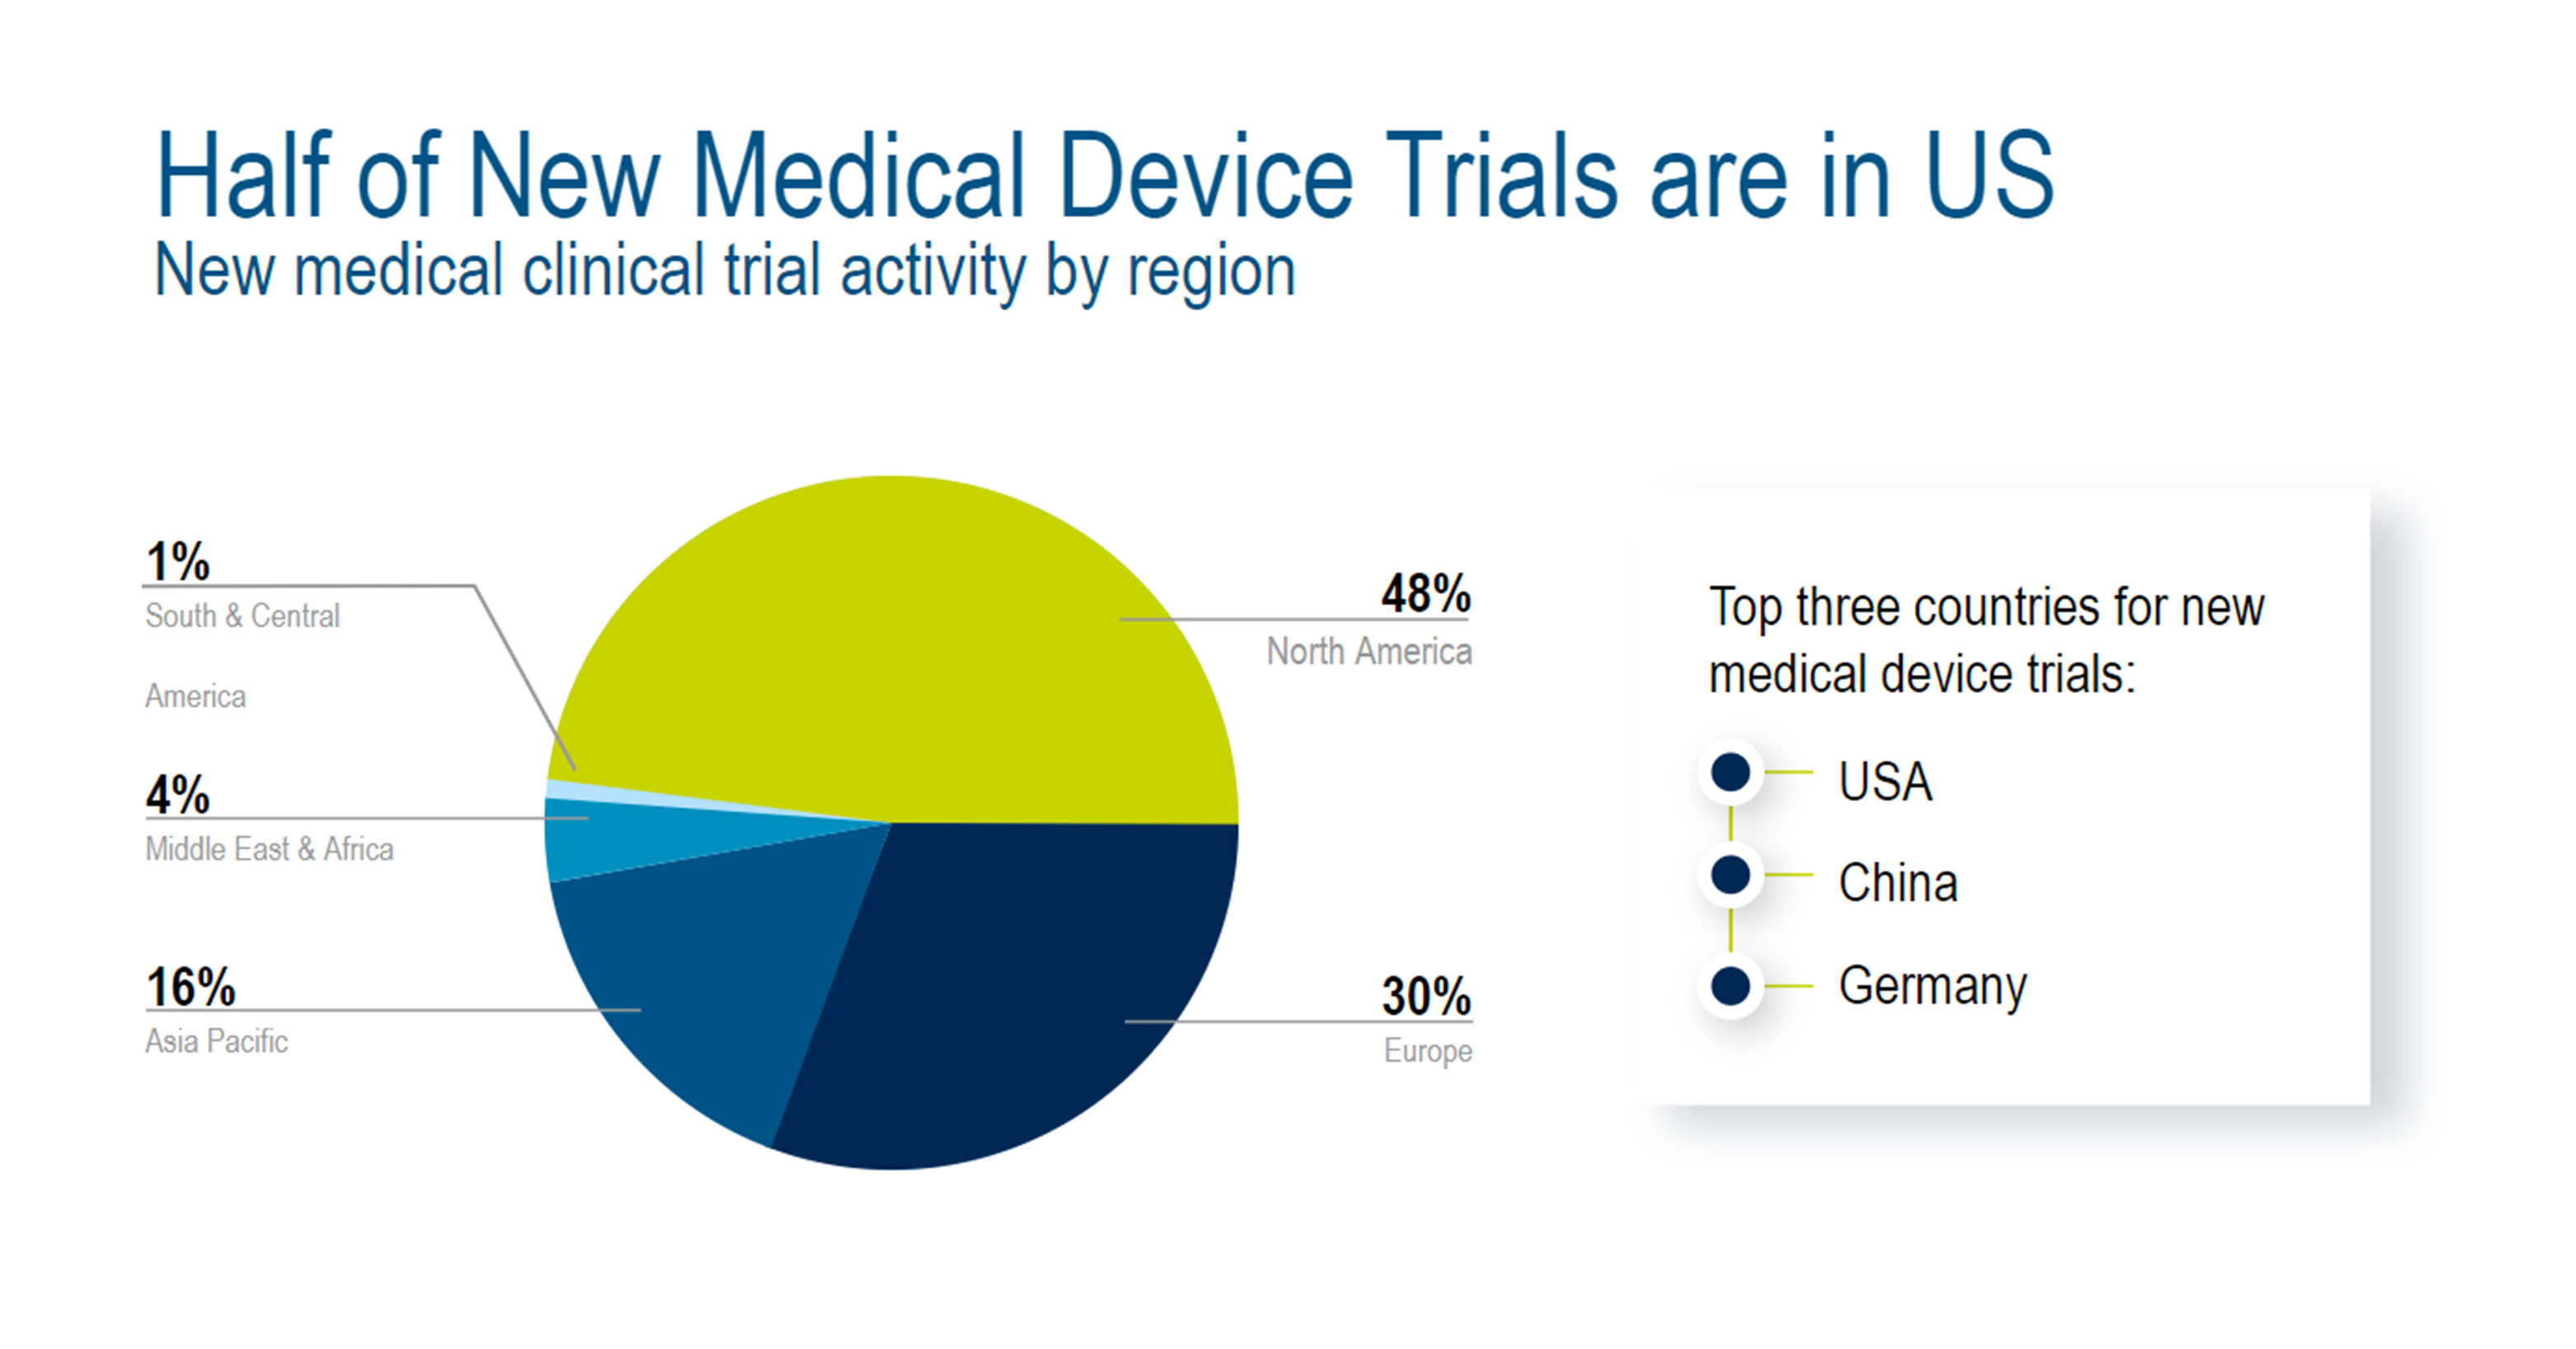 Half of New Medical Device Trials are in US